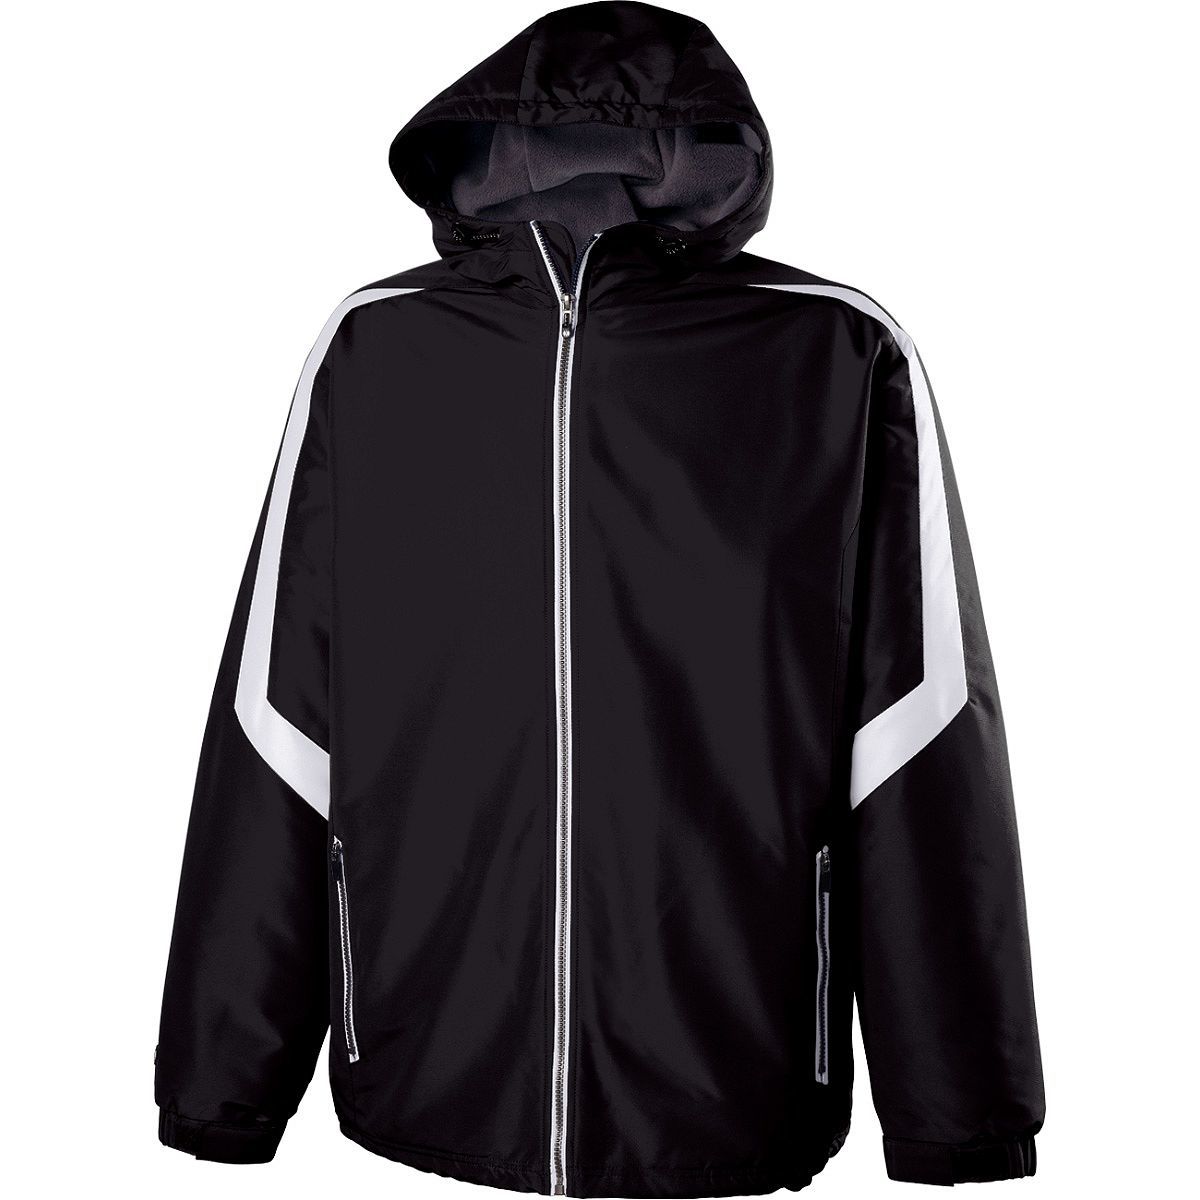 Holloway Sportswear 2XL Charger Jacket Black/White 229059 - image 1 of 4